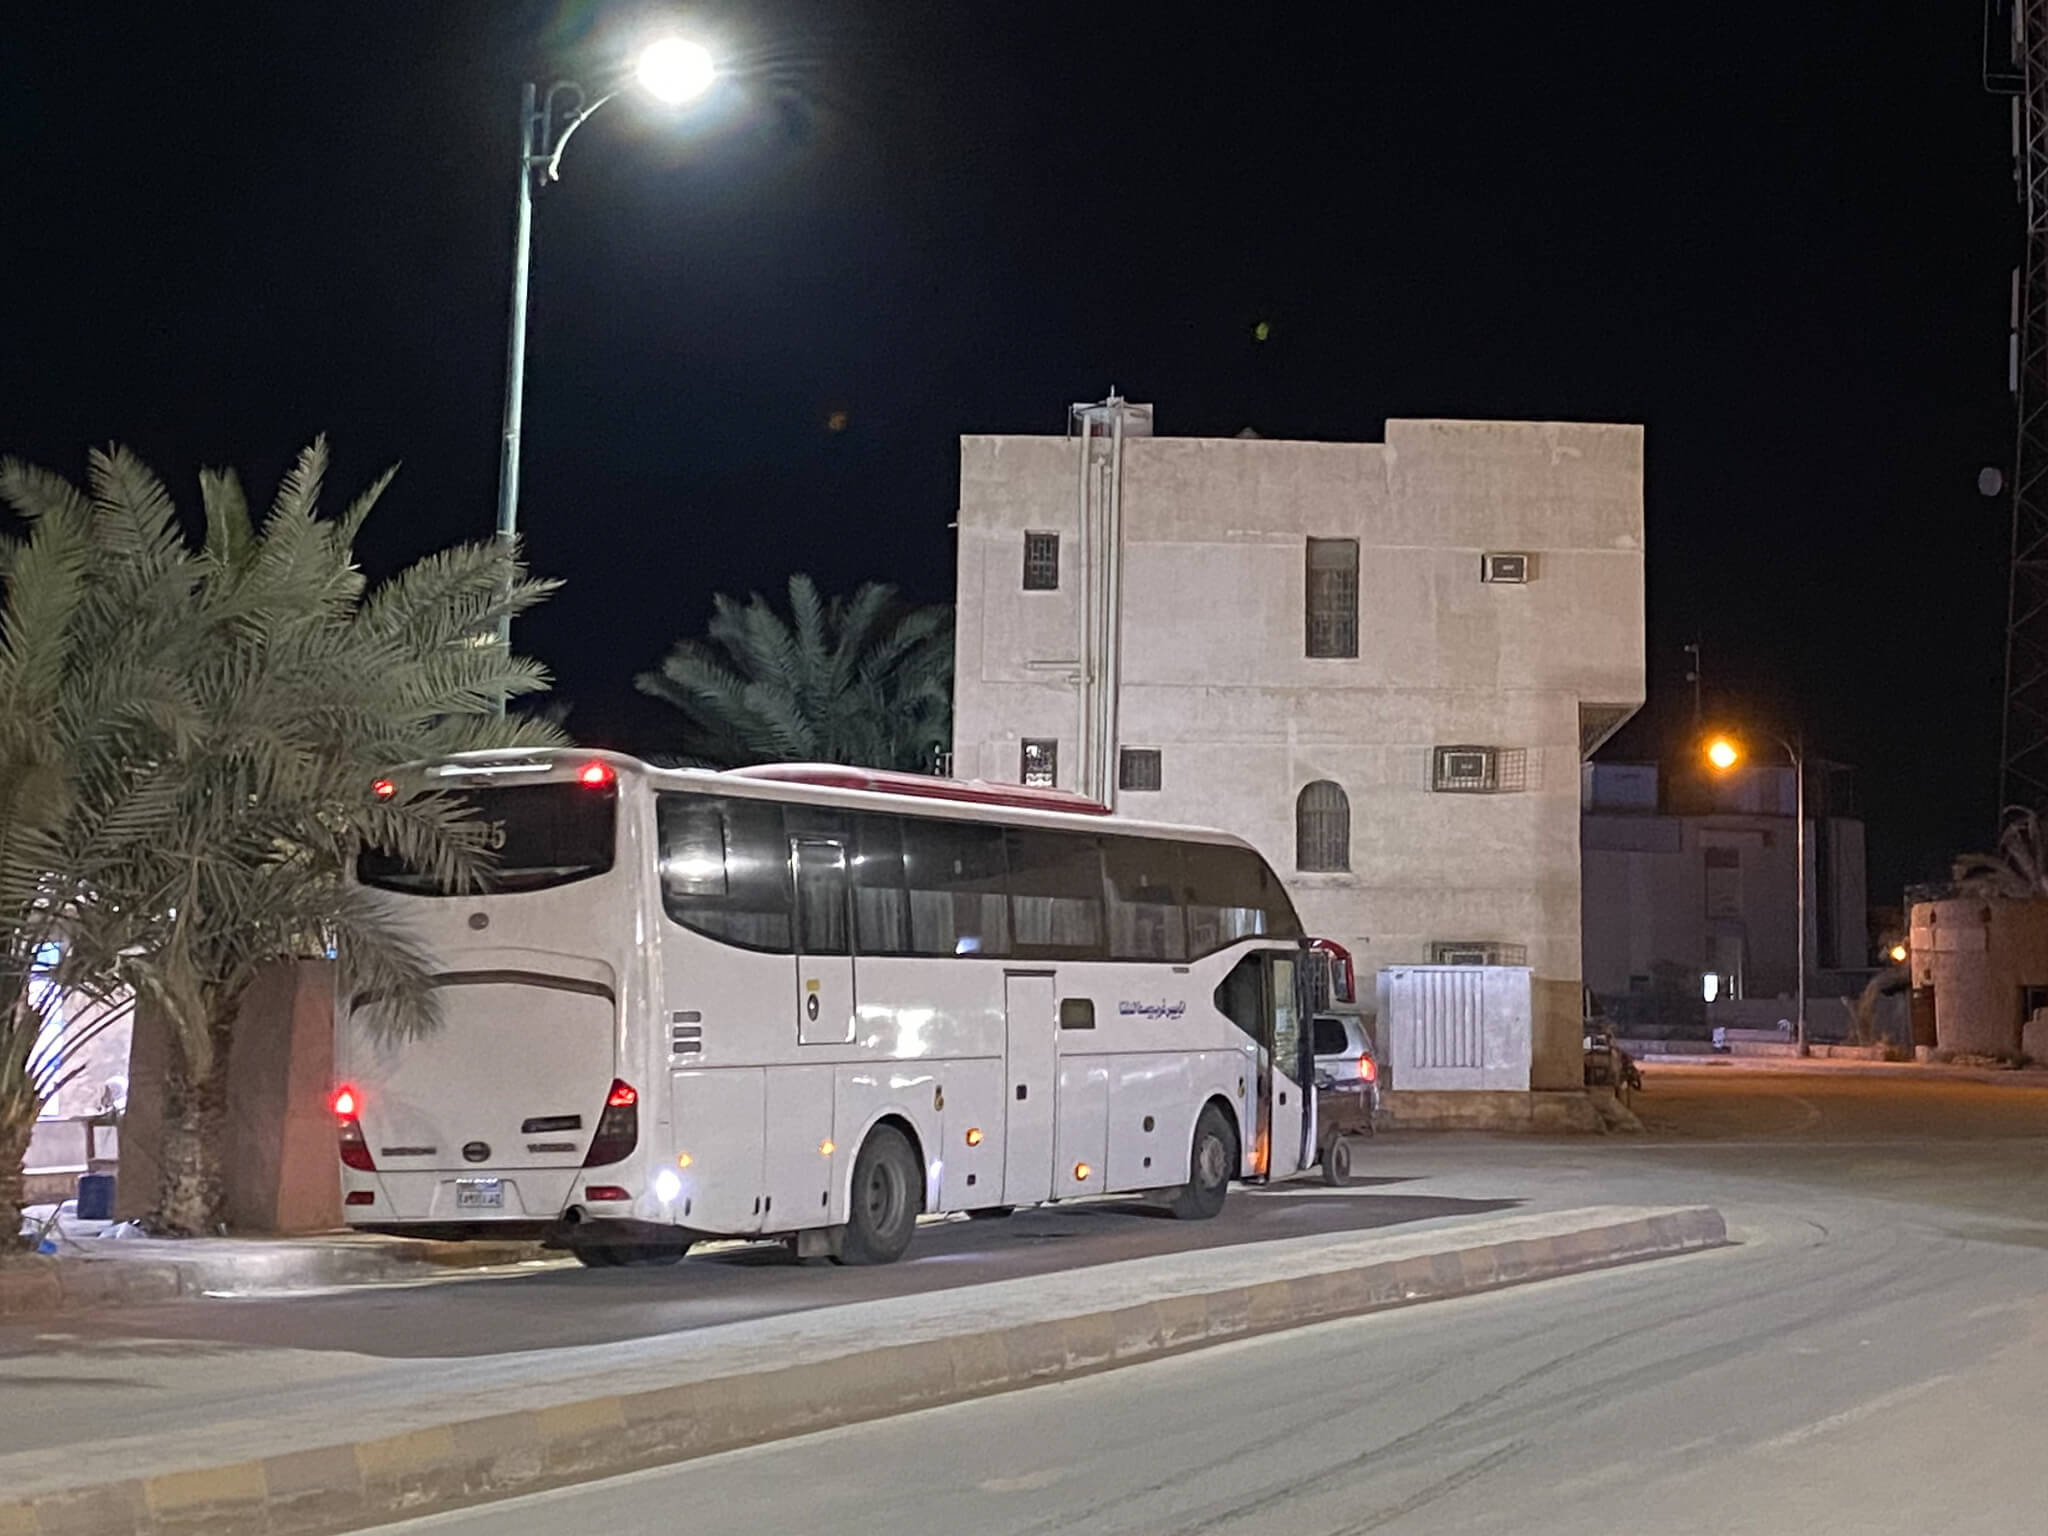 A modern bus parked on a street at night.